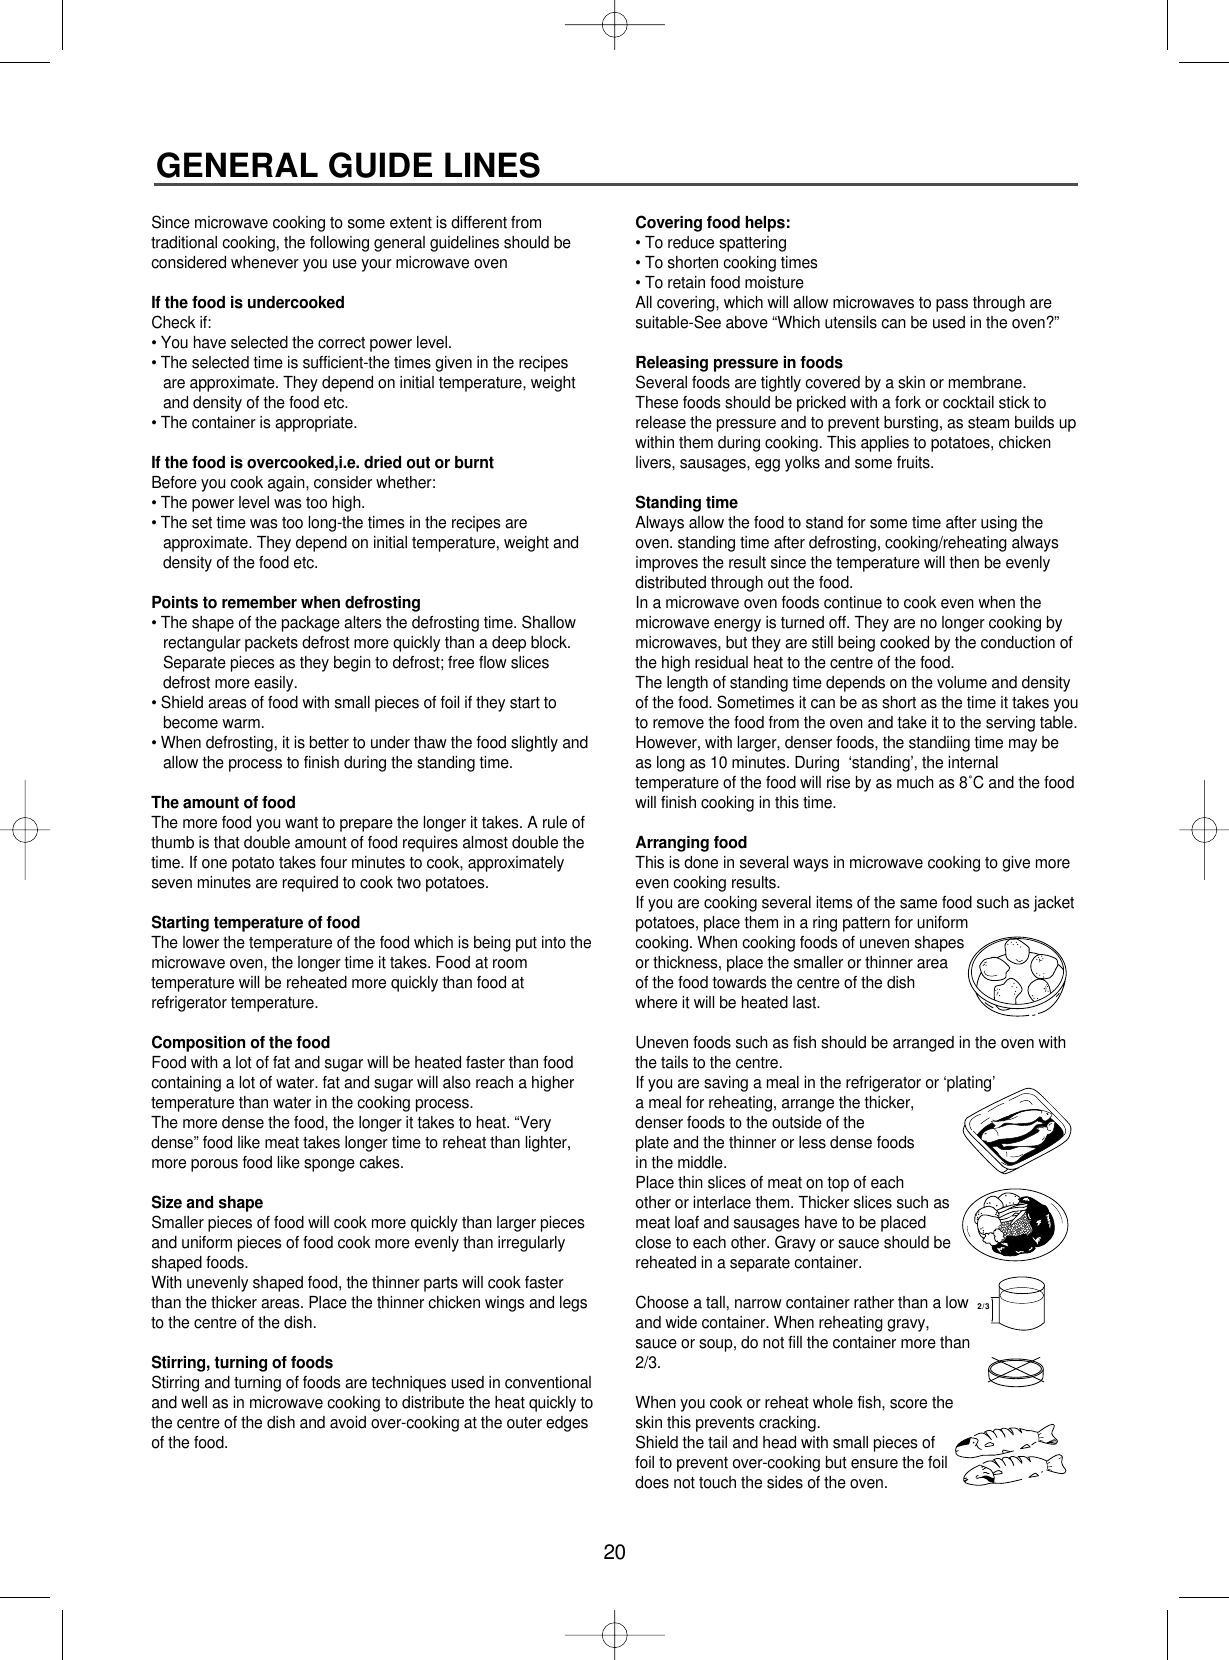 20GENERAL GUIDE LINESSince microwave cooking to some extent is different fromtraditional cooking, the following general guidelines should beconsidered whenever you use your microwave ovenIf the food is undercookedCheck if:• You have selected the correct power level.• The selected time is sufficient-the times given in the recipesare approximate. They depend on initial temperature, weightand density of the food etc.• The container is appropriate.If the food is overcooked,i.e. dried out or burntBefore you cook again, consider whether:• The power level was too high.• The set time was too long-the times in the recipes areapproximate. They depend on initial temperature, weight anddensity of the food etc.Points to remember when defrosting• The shape of the package alters the defrosting time. Shallowrectangular packets defrost more quickly than a deep block.Separate pieces as they begin to defrost; free flow slicesdefrost more easily.• Shield areas of food with small pieces of foil if they start tobecome warm.• When defrosting, it is better to under thaw the food slightly andallow the process to finish during the standing time.The amount of foodThe more food you want to prepare the longer it takes. A rule ofthumb is that double amount of food requires almost double thetime. If one potato takes four minutes to cook, approximatelyseven minutes are required to cook two potatoes.Starting temperature of foodThe lower the temperature of the food which is being put into themicrowave oven, the longer time it takes. Food at roomtemperature will be reheated more quickly than food atrefrigerator temperature.Composition of the foodFood with a lot of fat and sugar will be heated faster than foodcontaining a lot of water. fat and sugar will also reach a highertemperature than water in the cooking process.The more dense the food, the longer it takes to heat. “Verydense” food like meat takes longer time to reheat than lighter,more porous food like sponge cakes.Size and shapeSmaller pieces of food will cook more quickly than larger piecesand uniform pieces of food cook more evenly than irregularlyshaped foods.With unevenly shaped food, the thinner parts will cook fasterthan the thicker areas. Place the thinner chicken wings and legsto the centre of the dish.Stirring, turning of foodsStirring and turning of foods are techniques used in conventionaland well as in microwave cooking to distribute the heat quickly tothe centre of the dish and avoid over-cooking at the outer edgesof the food.Covering food helps:• To reduce spattering• To shorten cooking times• To retain food moistureAll covering, which will allow microwaves to pass through aresuitable-See above “Which utensils can be used in the oven?”Releasing pressure in foodsSeveral foods are tightly covered by a skin or membrane.These foods should be pricked with a fork or cocktail stick torelease the pressure and to prevent bursting, as steam builds upwithin them during cooking. This applies to potatoes, chickenlivers, sausages, egg yolks and some fruits.Standing timeAlways allow the food to stand for some time after using theoven. standing time after defrosting, cooking/reheating alwaysimproves the result since the temperature will then be evenlydistributed through out the food.In a microwave oven foods continue to cook even when themicrowave energy is turned off. They are no longer cooking bymicrowaves, but they are still being cooked by the conduction ofthe high residual heat to the centre of the food. The length of standing time depends on the volume and densityof the food. Sometimes it can be as short as the time it takes youto remove the food from the oven and take it to the serving table.However, with larger, denser foods, the standiing time may beas long as 10 minutes. During  ‘standing’, the internaltemperature of the food will rise by as much as 8˚C and the foodwill finish cooking in this time.Arranging foodThis is done in several ways in microwave cooking to give moreeven cooking results.If you are cooking several items of the same food such as jacketpotatoes, place them in a ring pattern for uniformcooking. When cooking foods of uneven shapesor thickness, place the smaller or thinner areaof the food towards the centre of the dishwhere it will be heated last.Uneven foods such as fish should be arranged in the oven withthe tails to the centre.If you are saving a meal in the refrigerator or ‘plating’a meal for reheating, arrange the thicker,denser foods to the outside of the plate and the thinner or less dense foods in the middle. Place thin slices of meat on top of each other or interlace them. Thicker slices such asmeat loaf and sausages have to be placedclose to each other. Gravy or sauce should bereheated in a separate container.Choose a tall, narrow container rather than a lowand wide container. When reheating gravy,sauce or soup, do not fill the container more than2/3.When you cook or reheat whole fish, score theskin this prevents cracking.Shield the tail and head with small pieces offoil to prevent over-cooking but ensure the foildoes not touch the sides of the oven.2/3